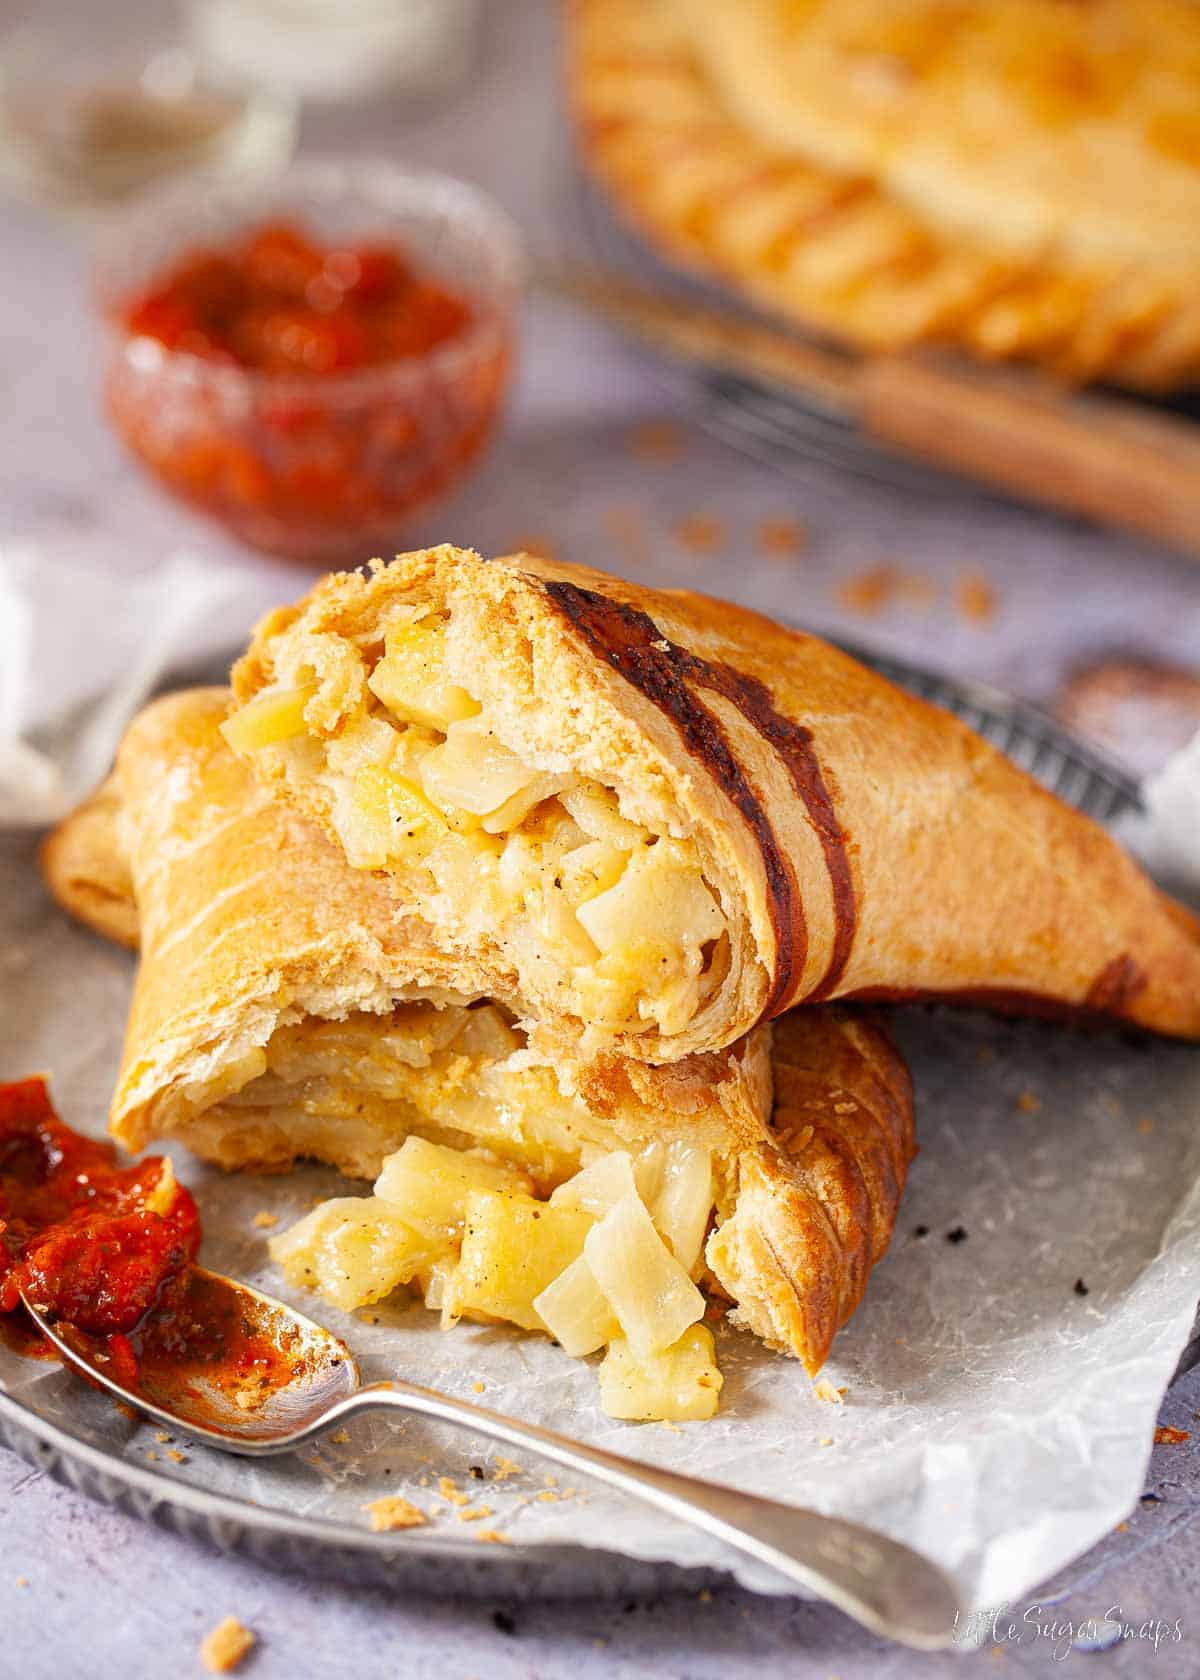 A potato, cheese and onion pasty torn open on a plate to reveal the filling.